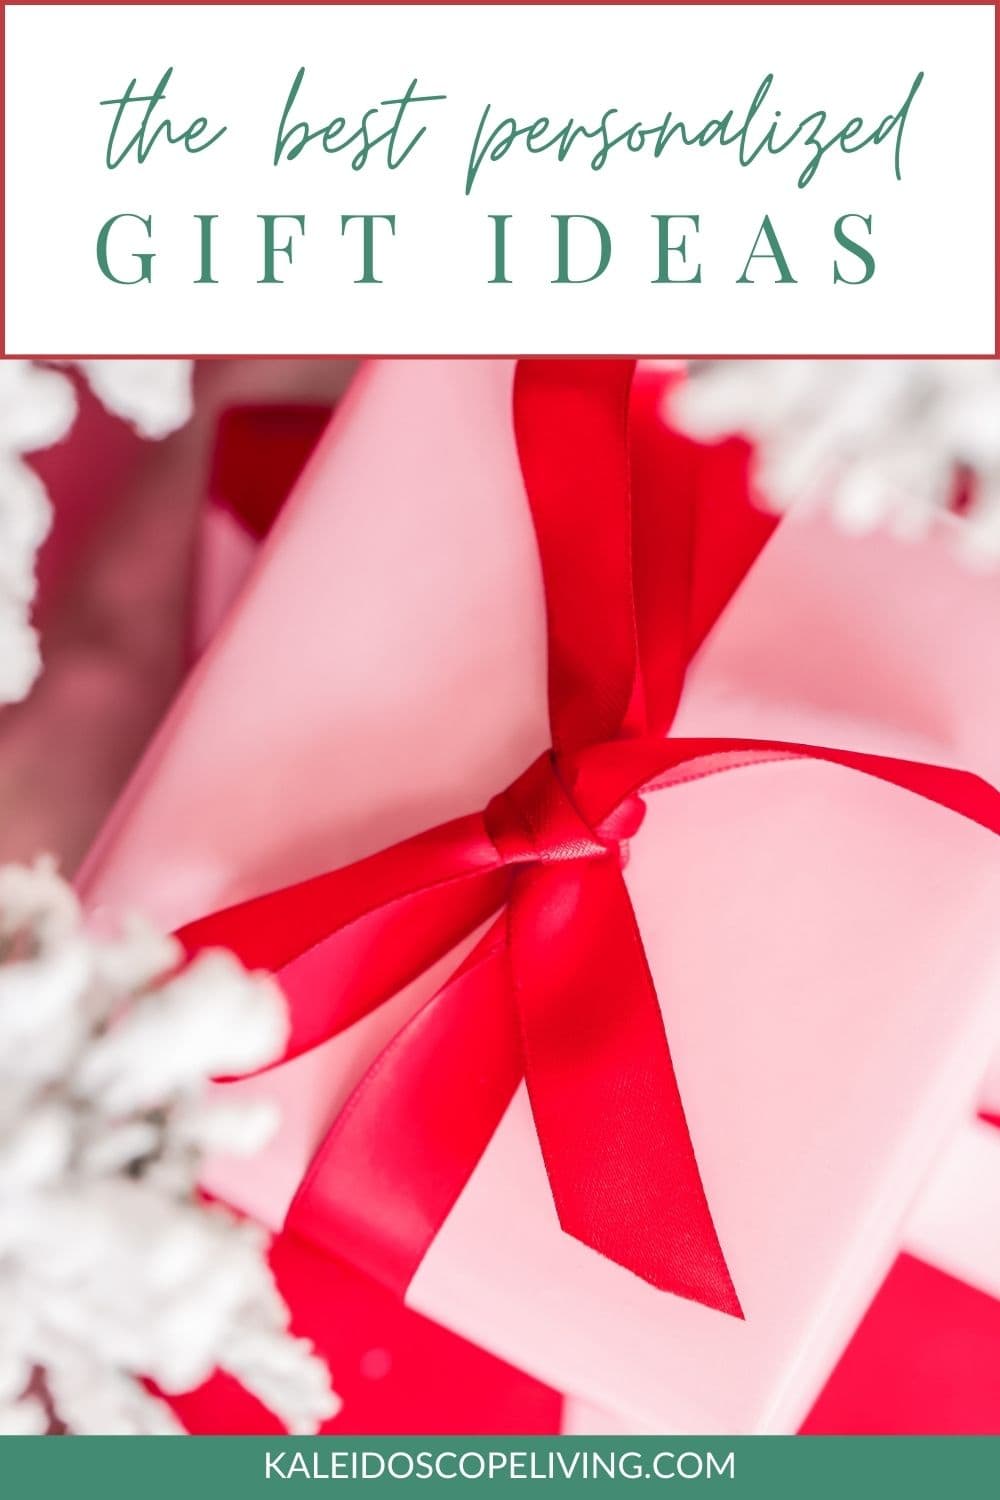 Perfect gift ideas for every guy on your list